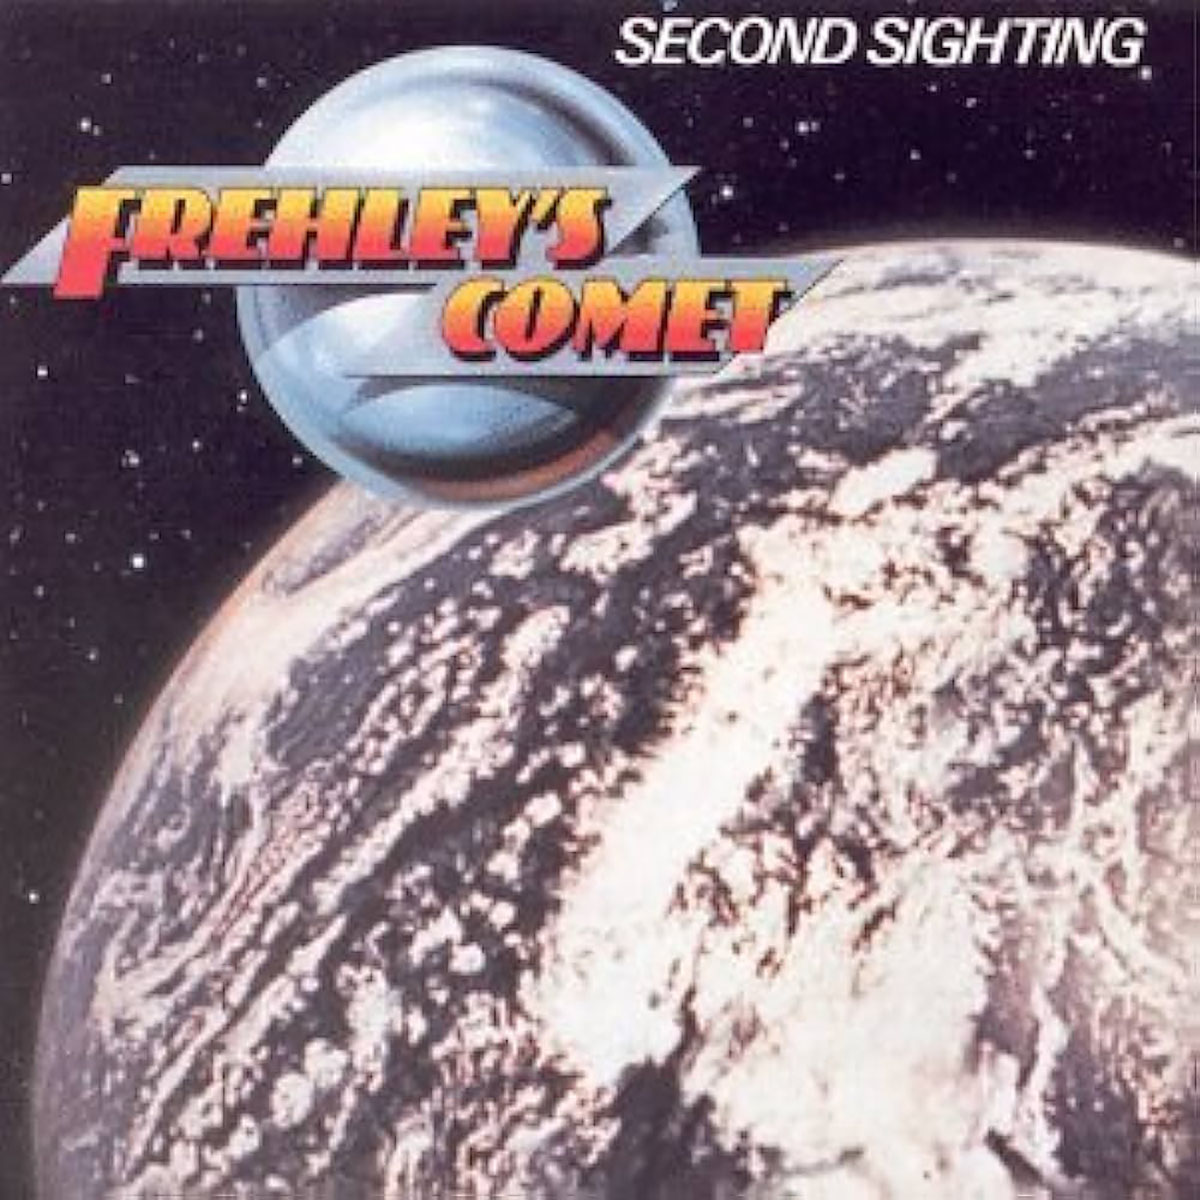 Ace Frehley´s Comet - Second Sighting